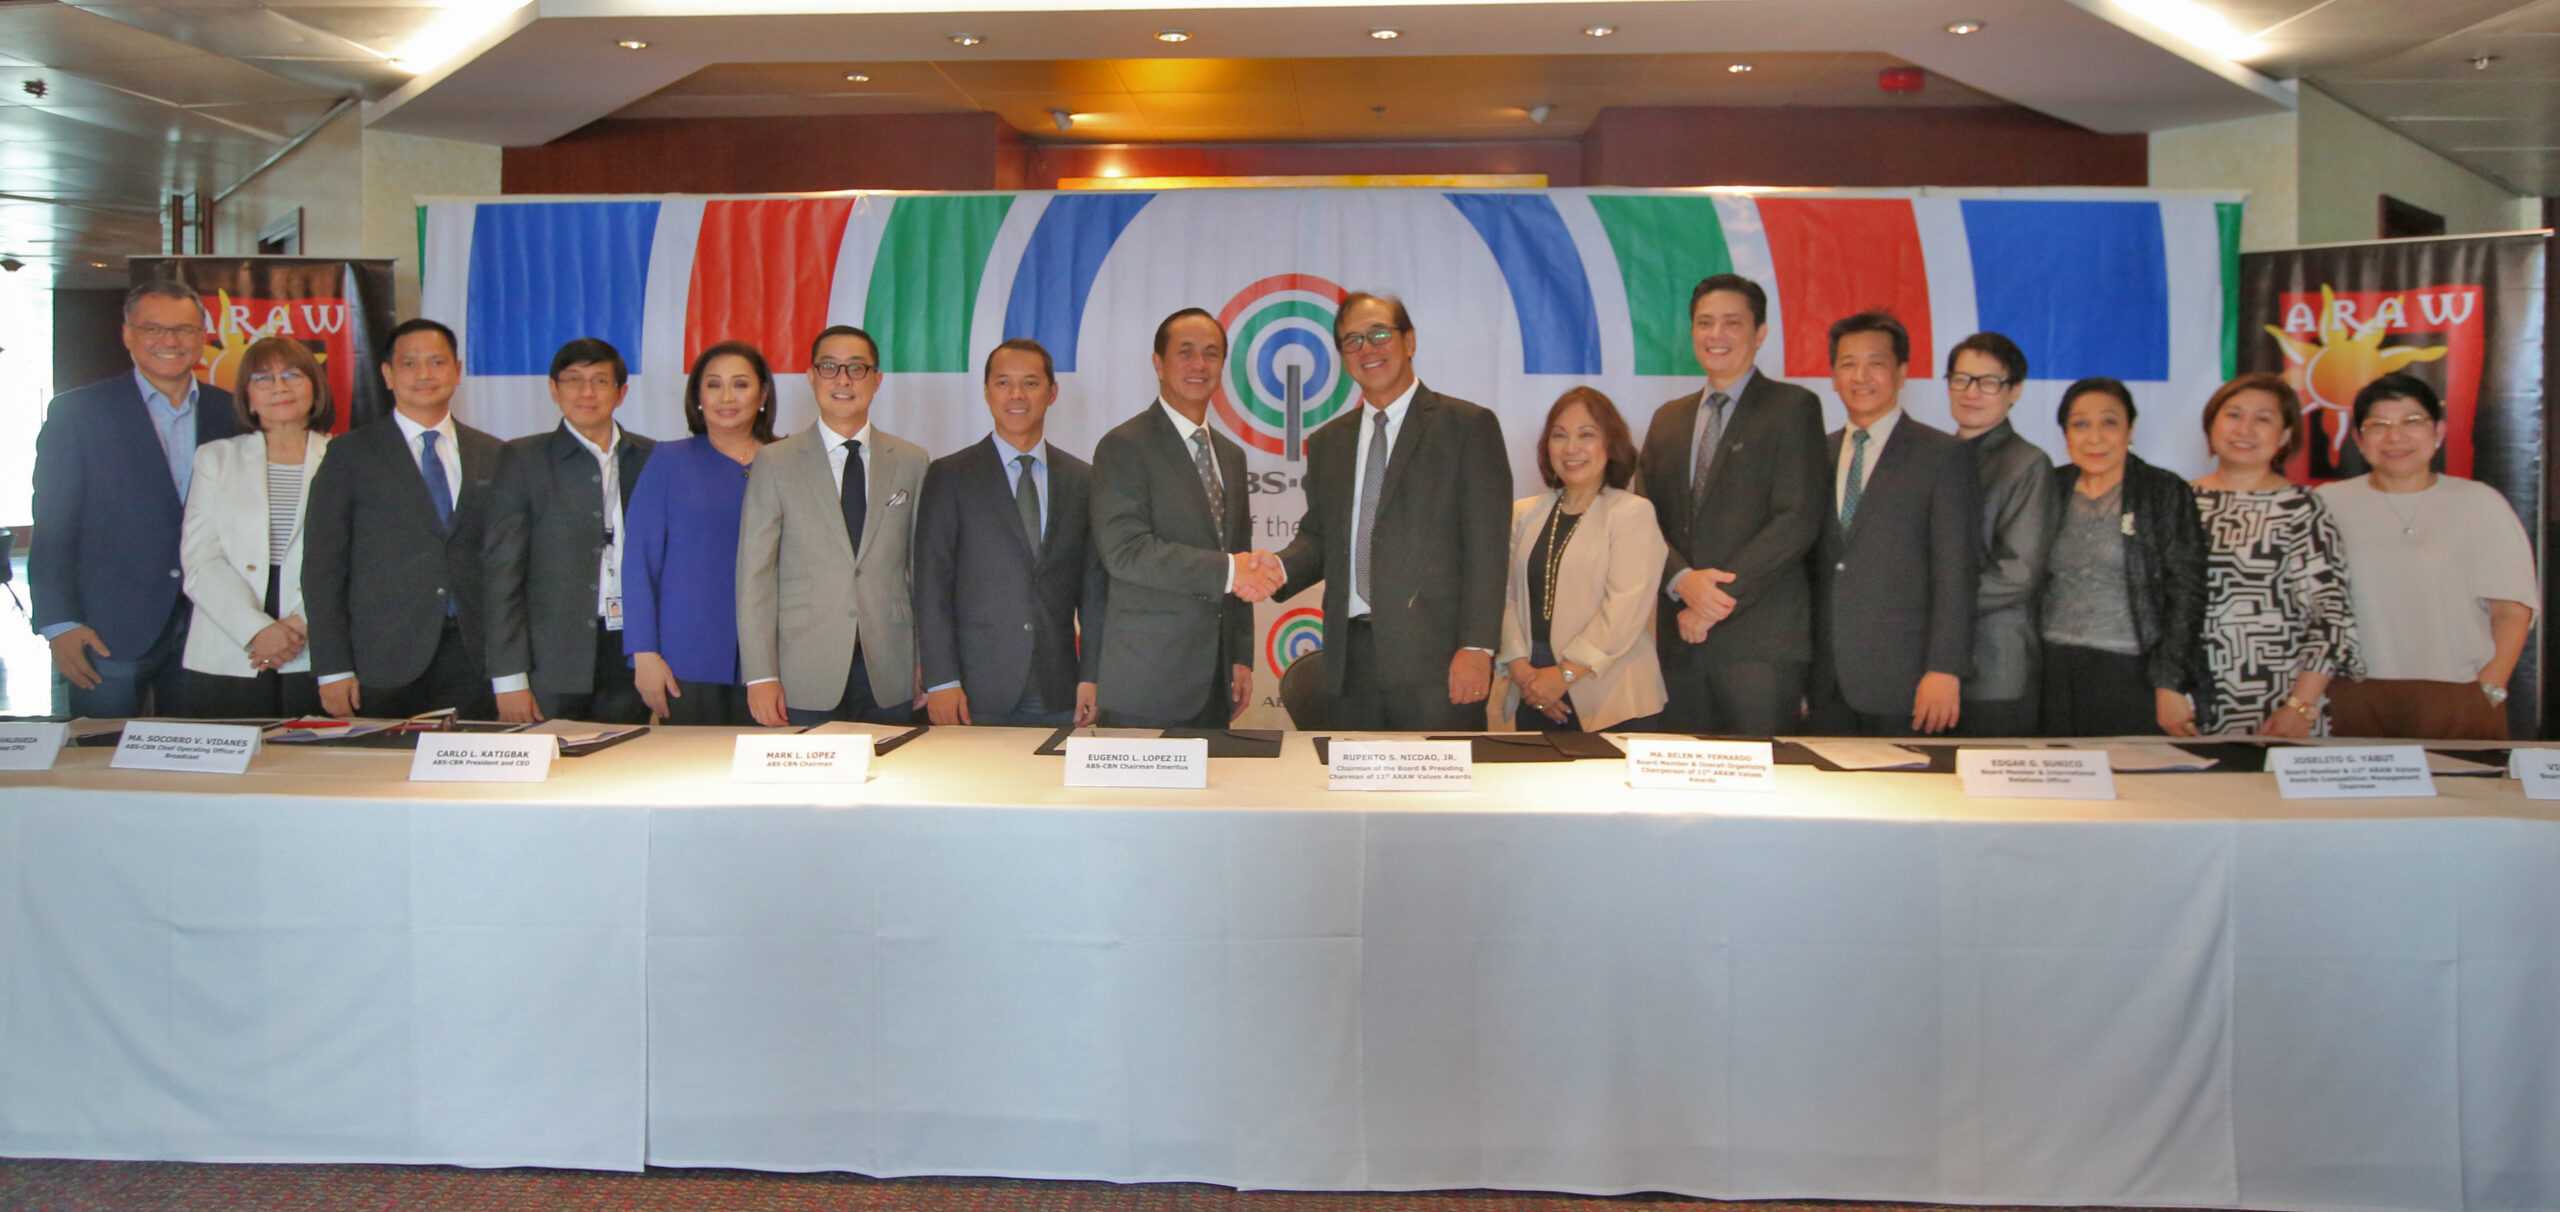 ABS-CBN partners anew with Advertising Foundation for ARAW Values Awards 2019